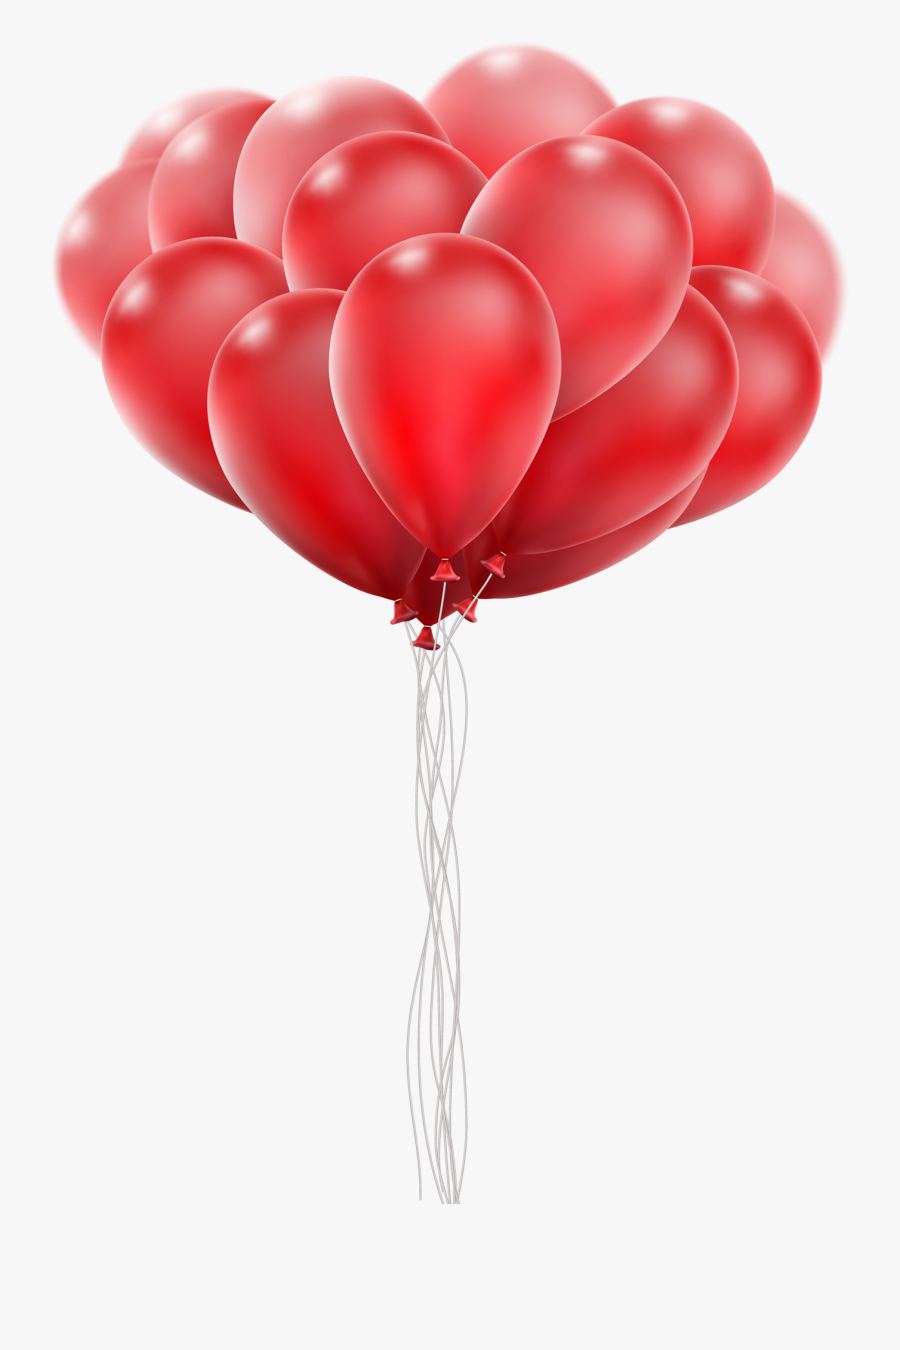 Red Balloon Png - Red Balloons Transparent Background, Transparent Clipart